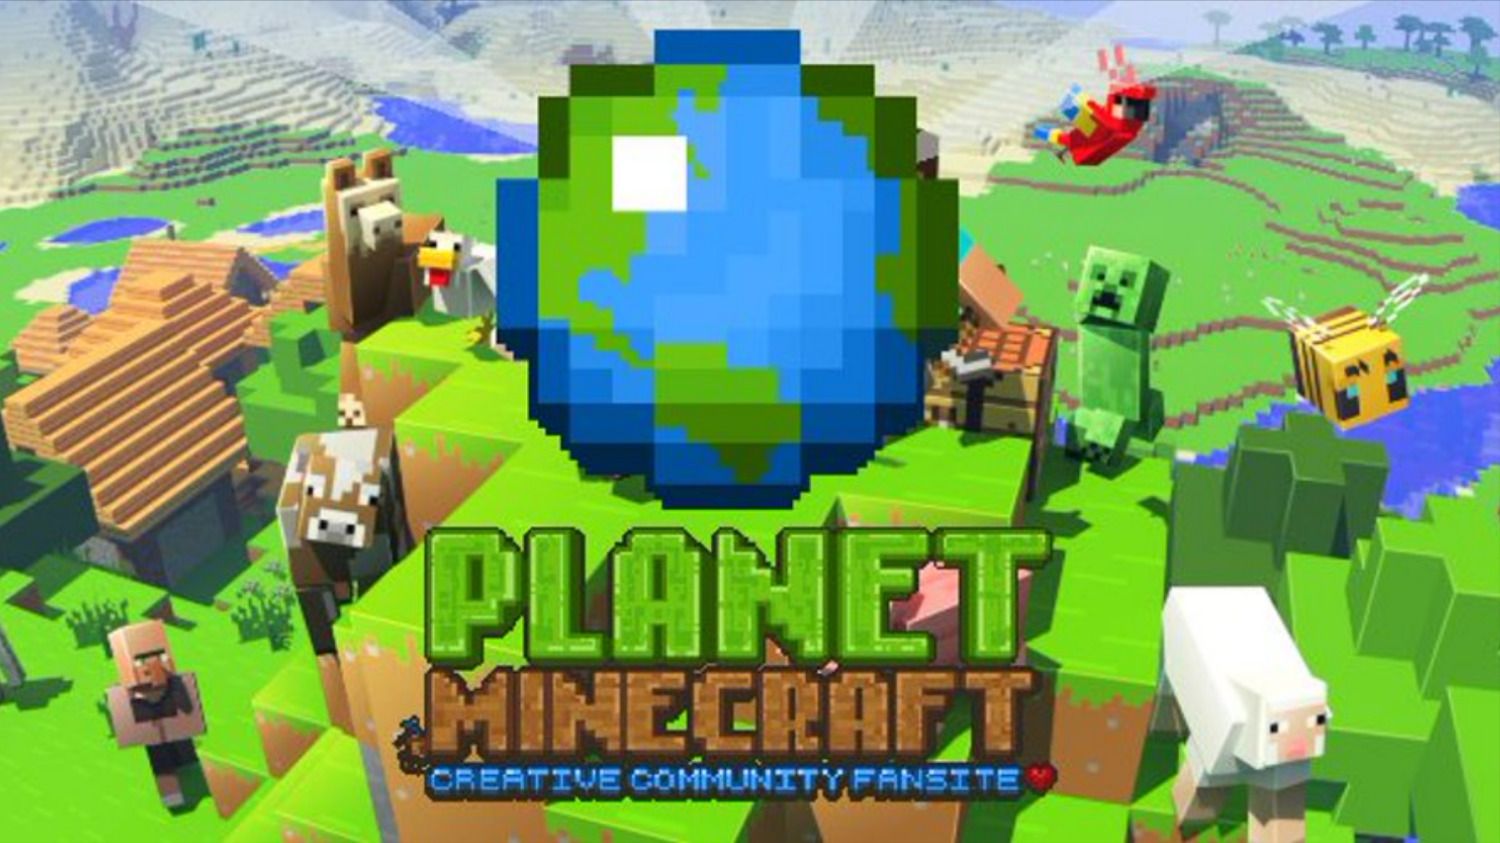 What is Planet Minecraft? - Minecraft Blog - Micdoodle8